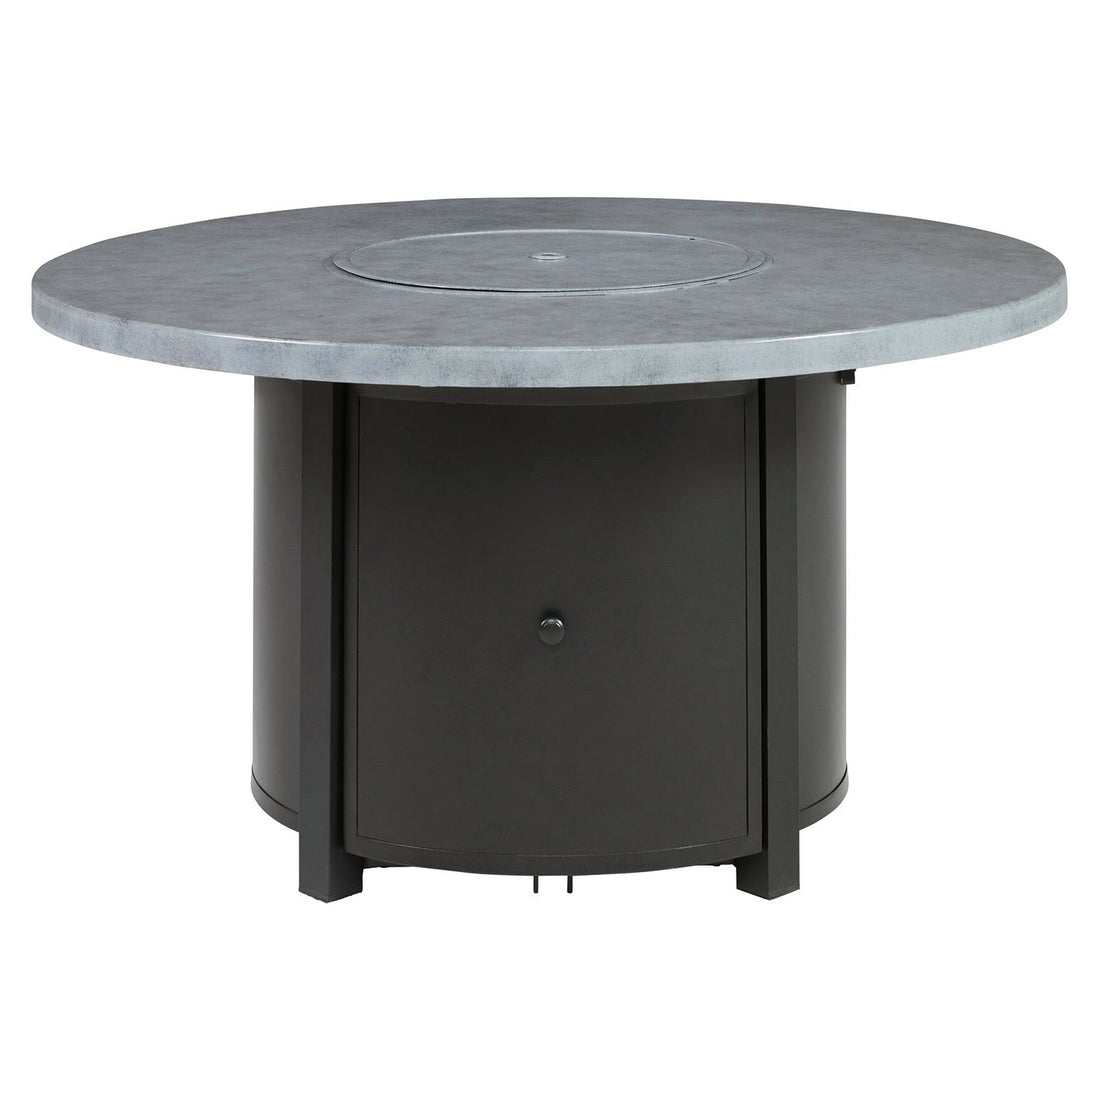 Coulee Mills Fire Pit Table Ash-P187-776